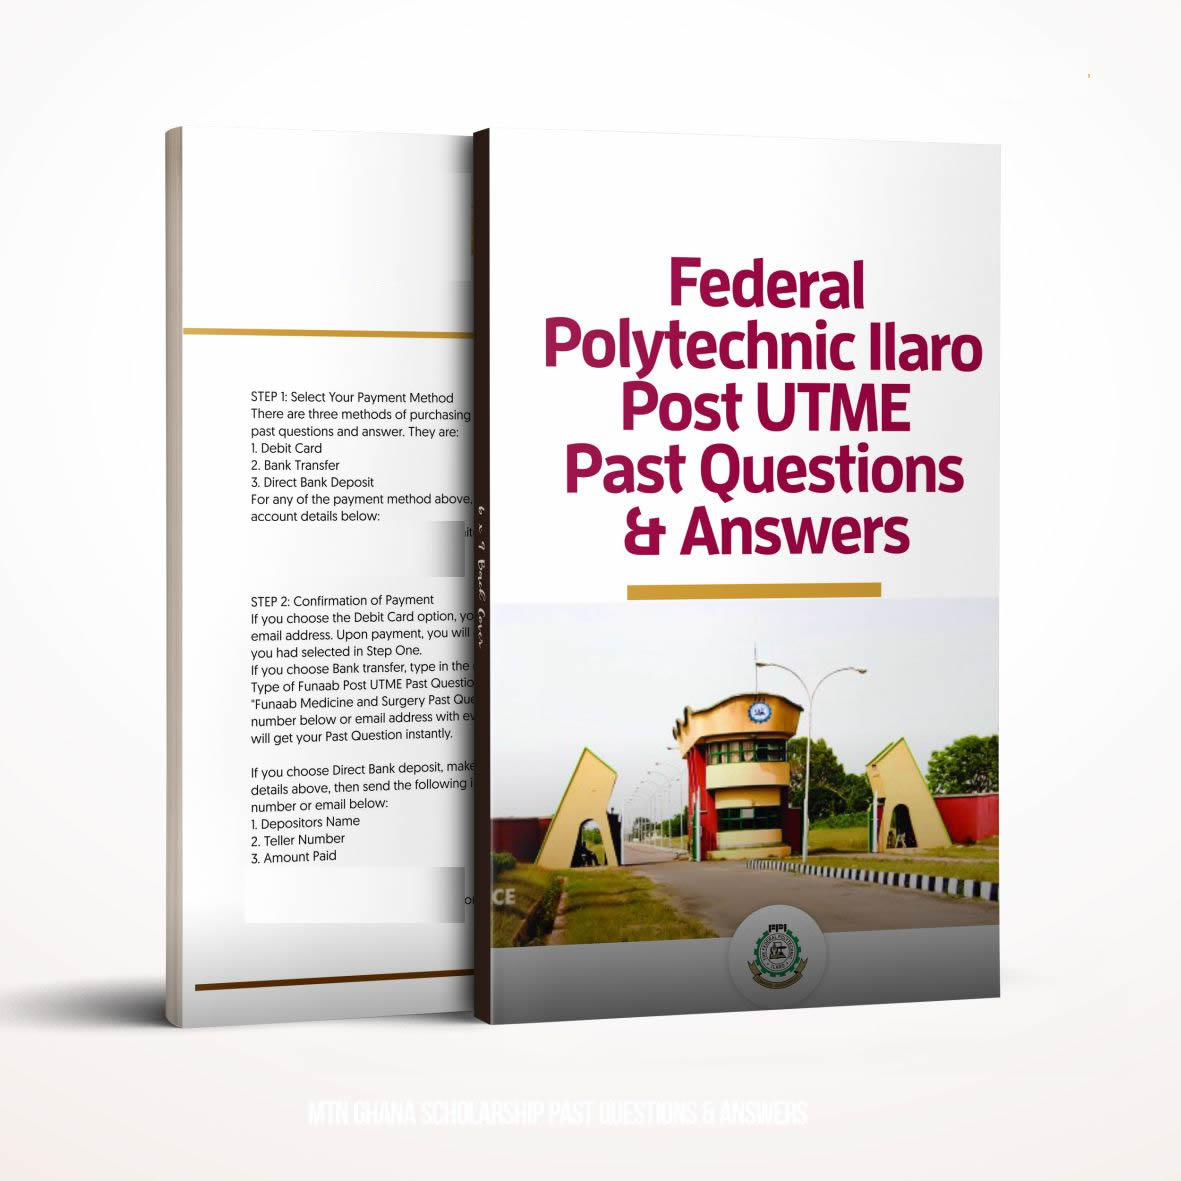 Fed Poly Ilaro post utme past questions and answers - Pdf